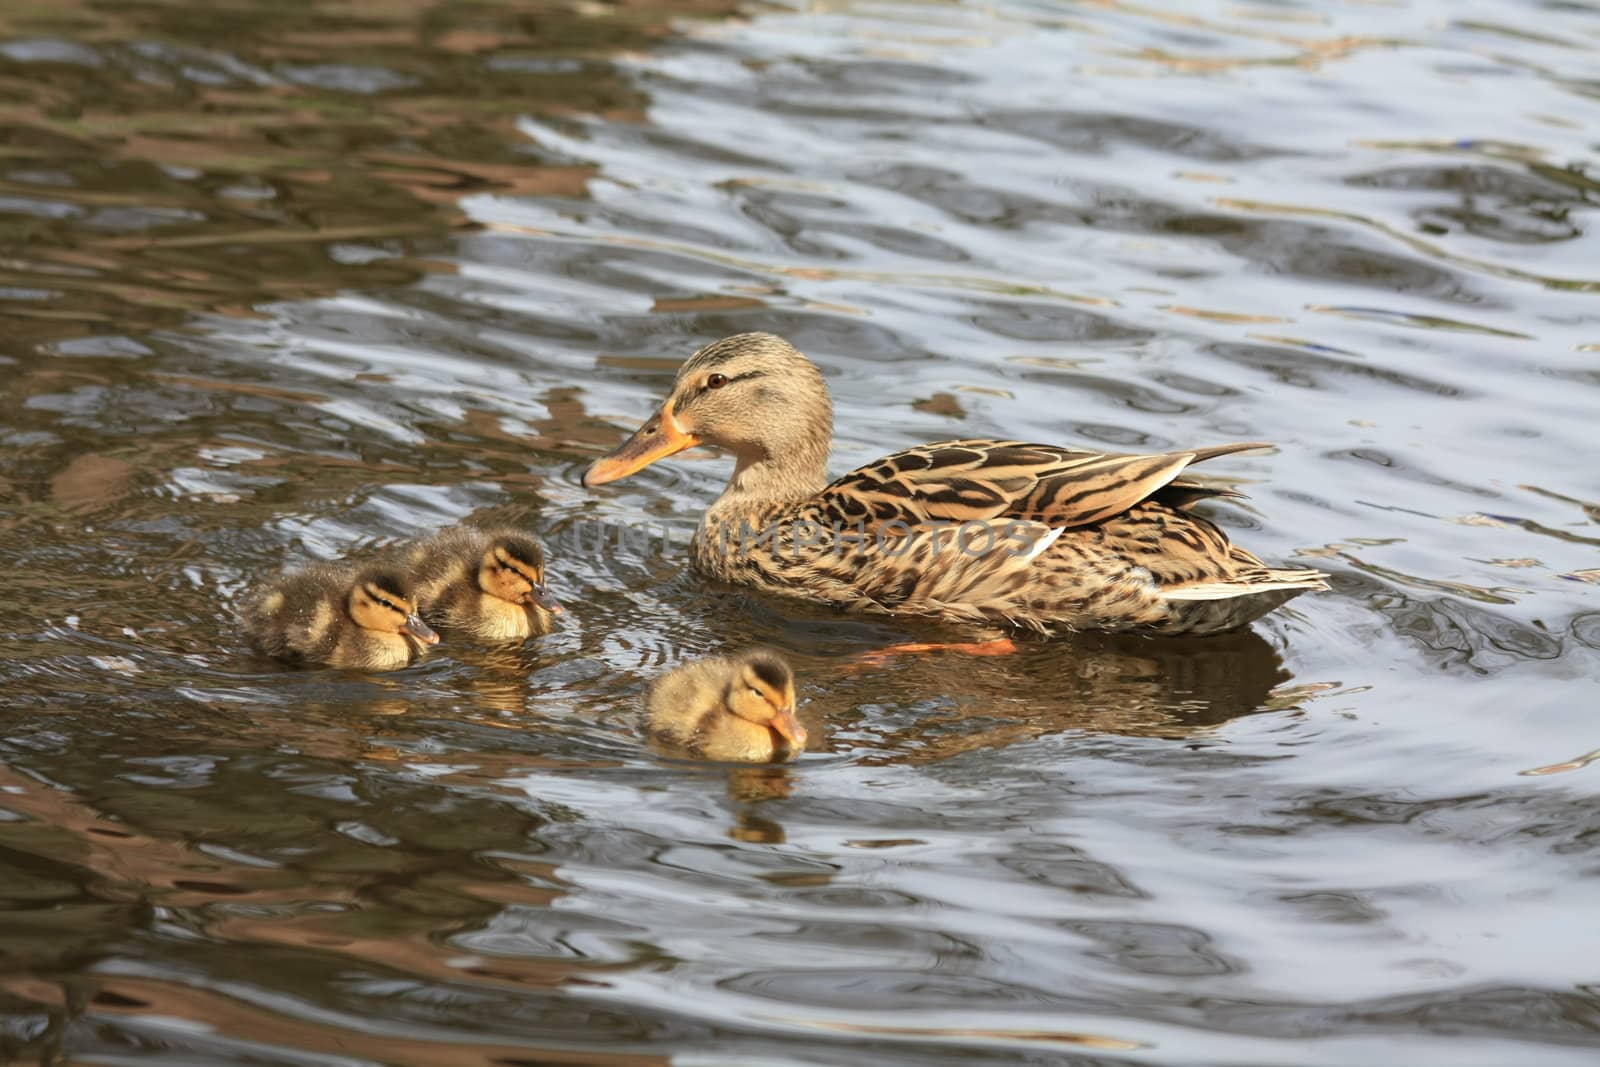 A mother duck and three small ducklings